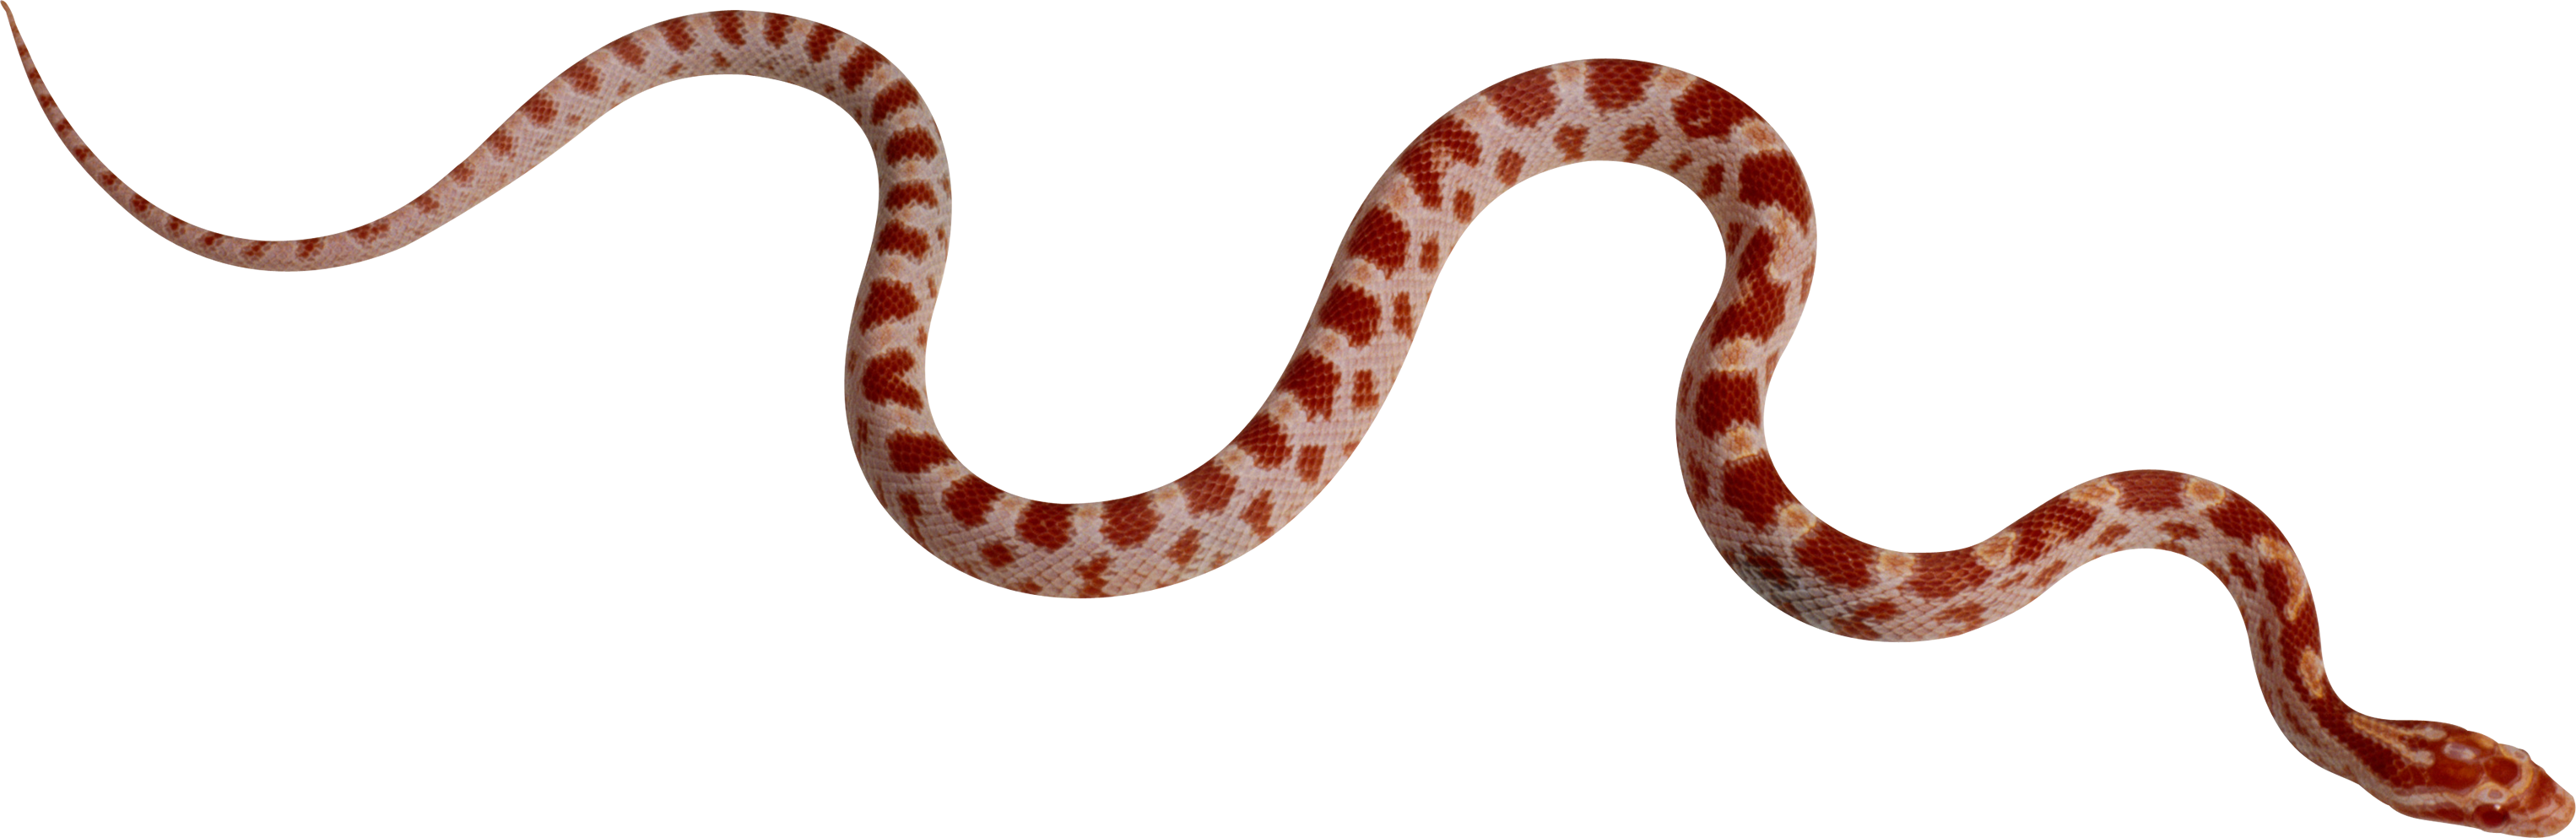 Thirty eight isolated stock. Snake clipart tiger snake